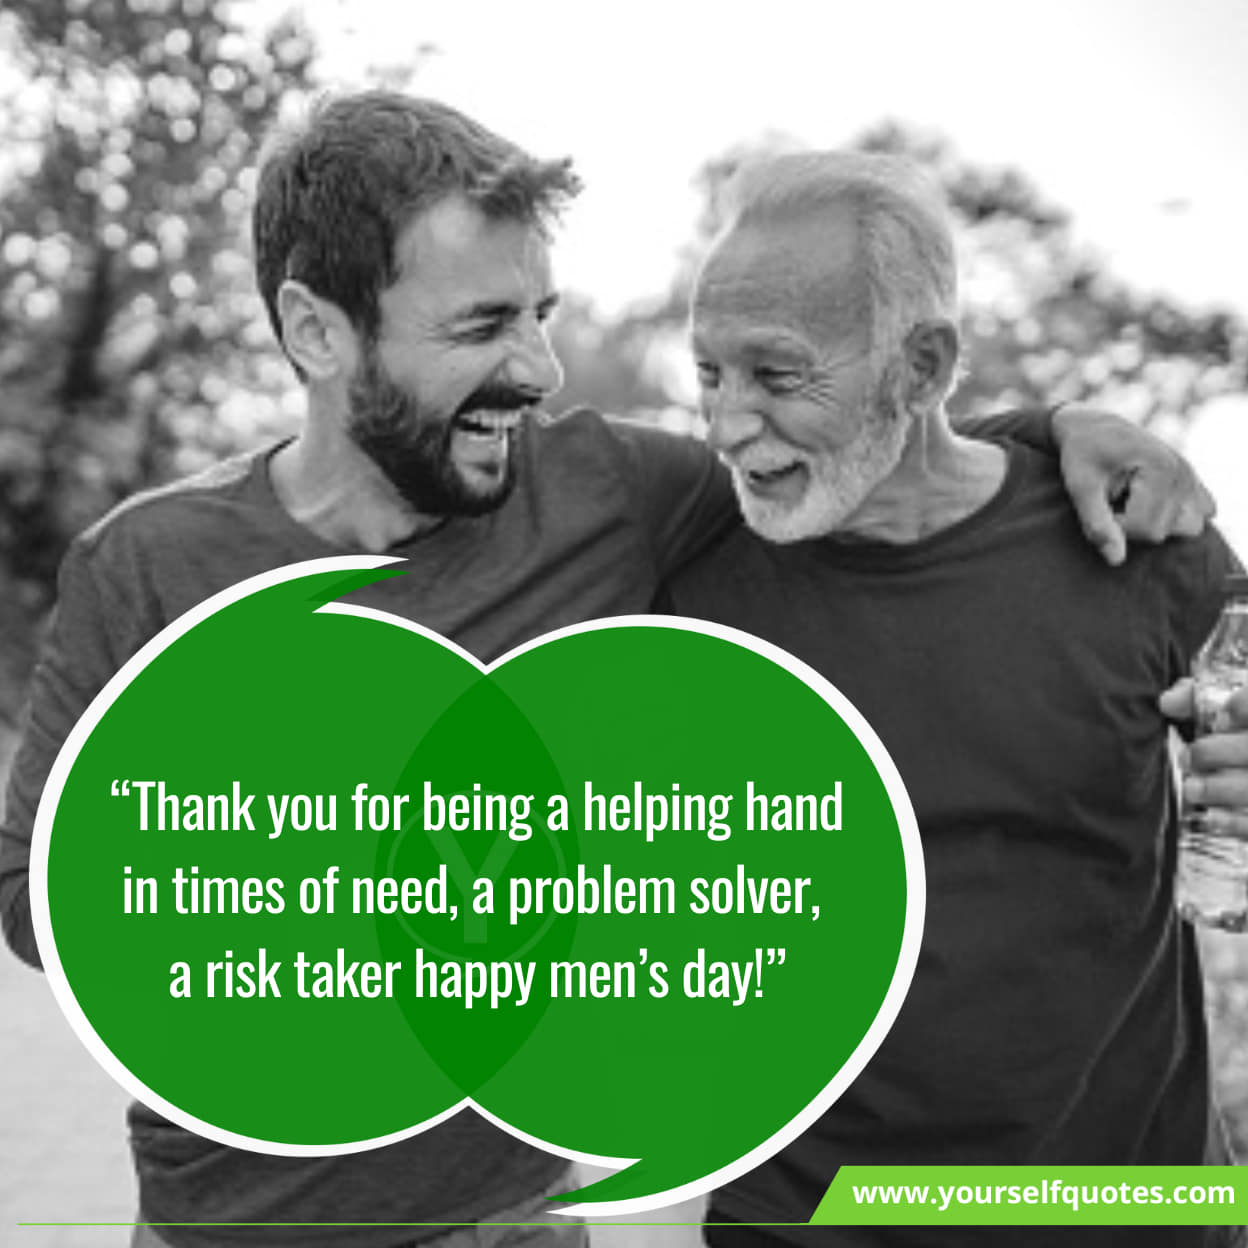 Exciting Quotes On Happy Men’s Day